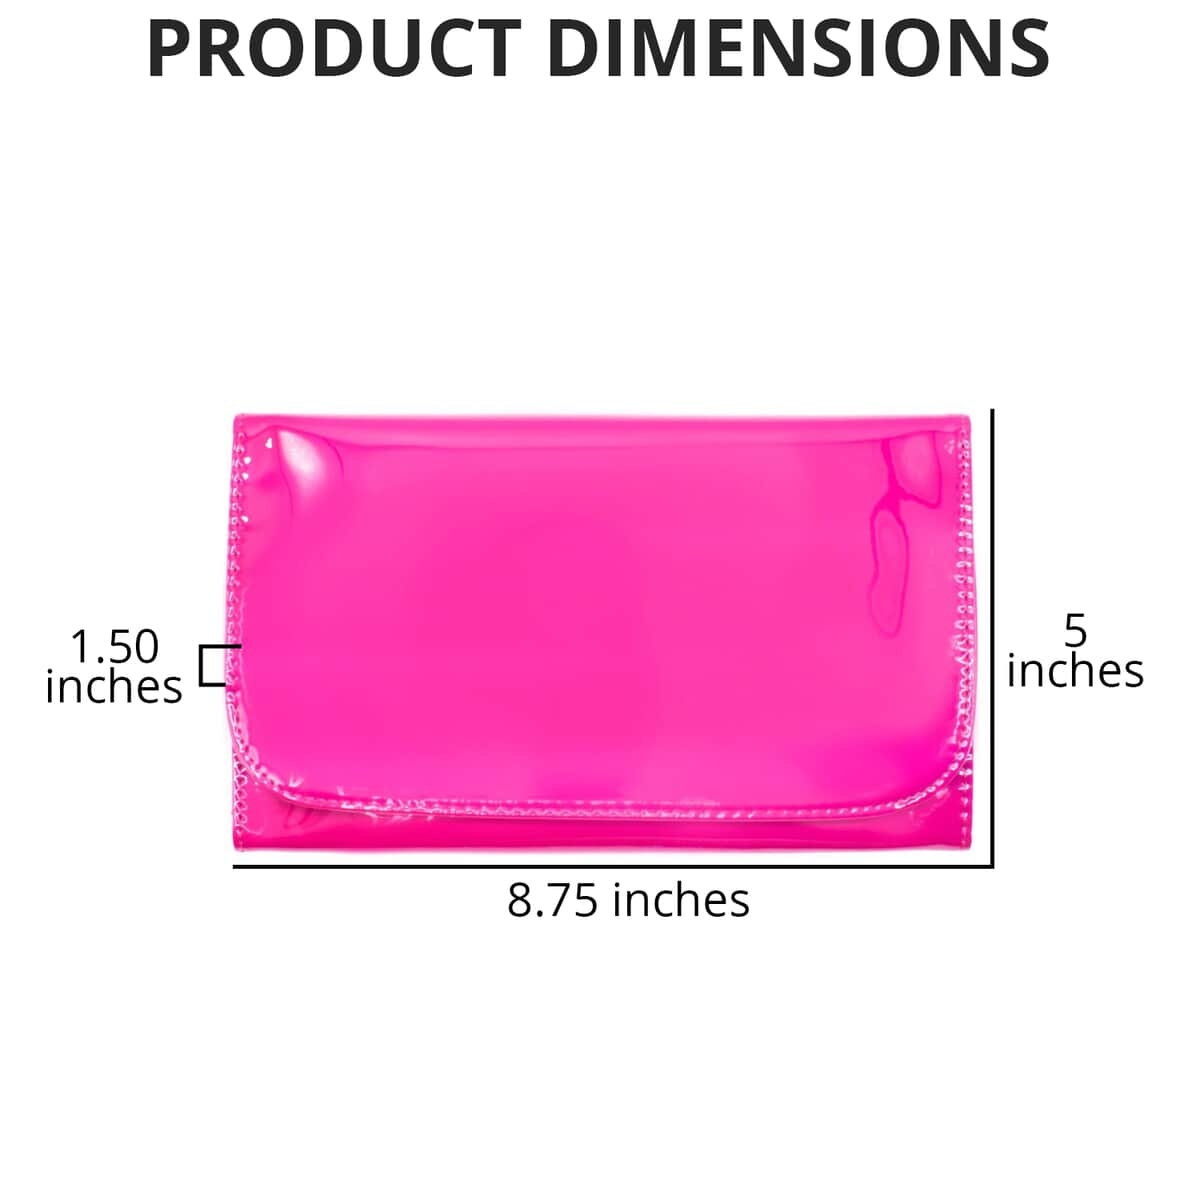 Pink Vinyl Cosmetic Bag with Translucent Glitter Handle Brushes , Women's Makeup Bag , Makeup Pouch , Travel Makeup Bag image number 3